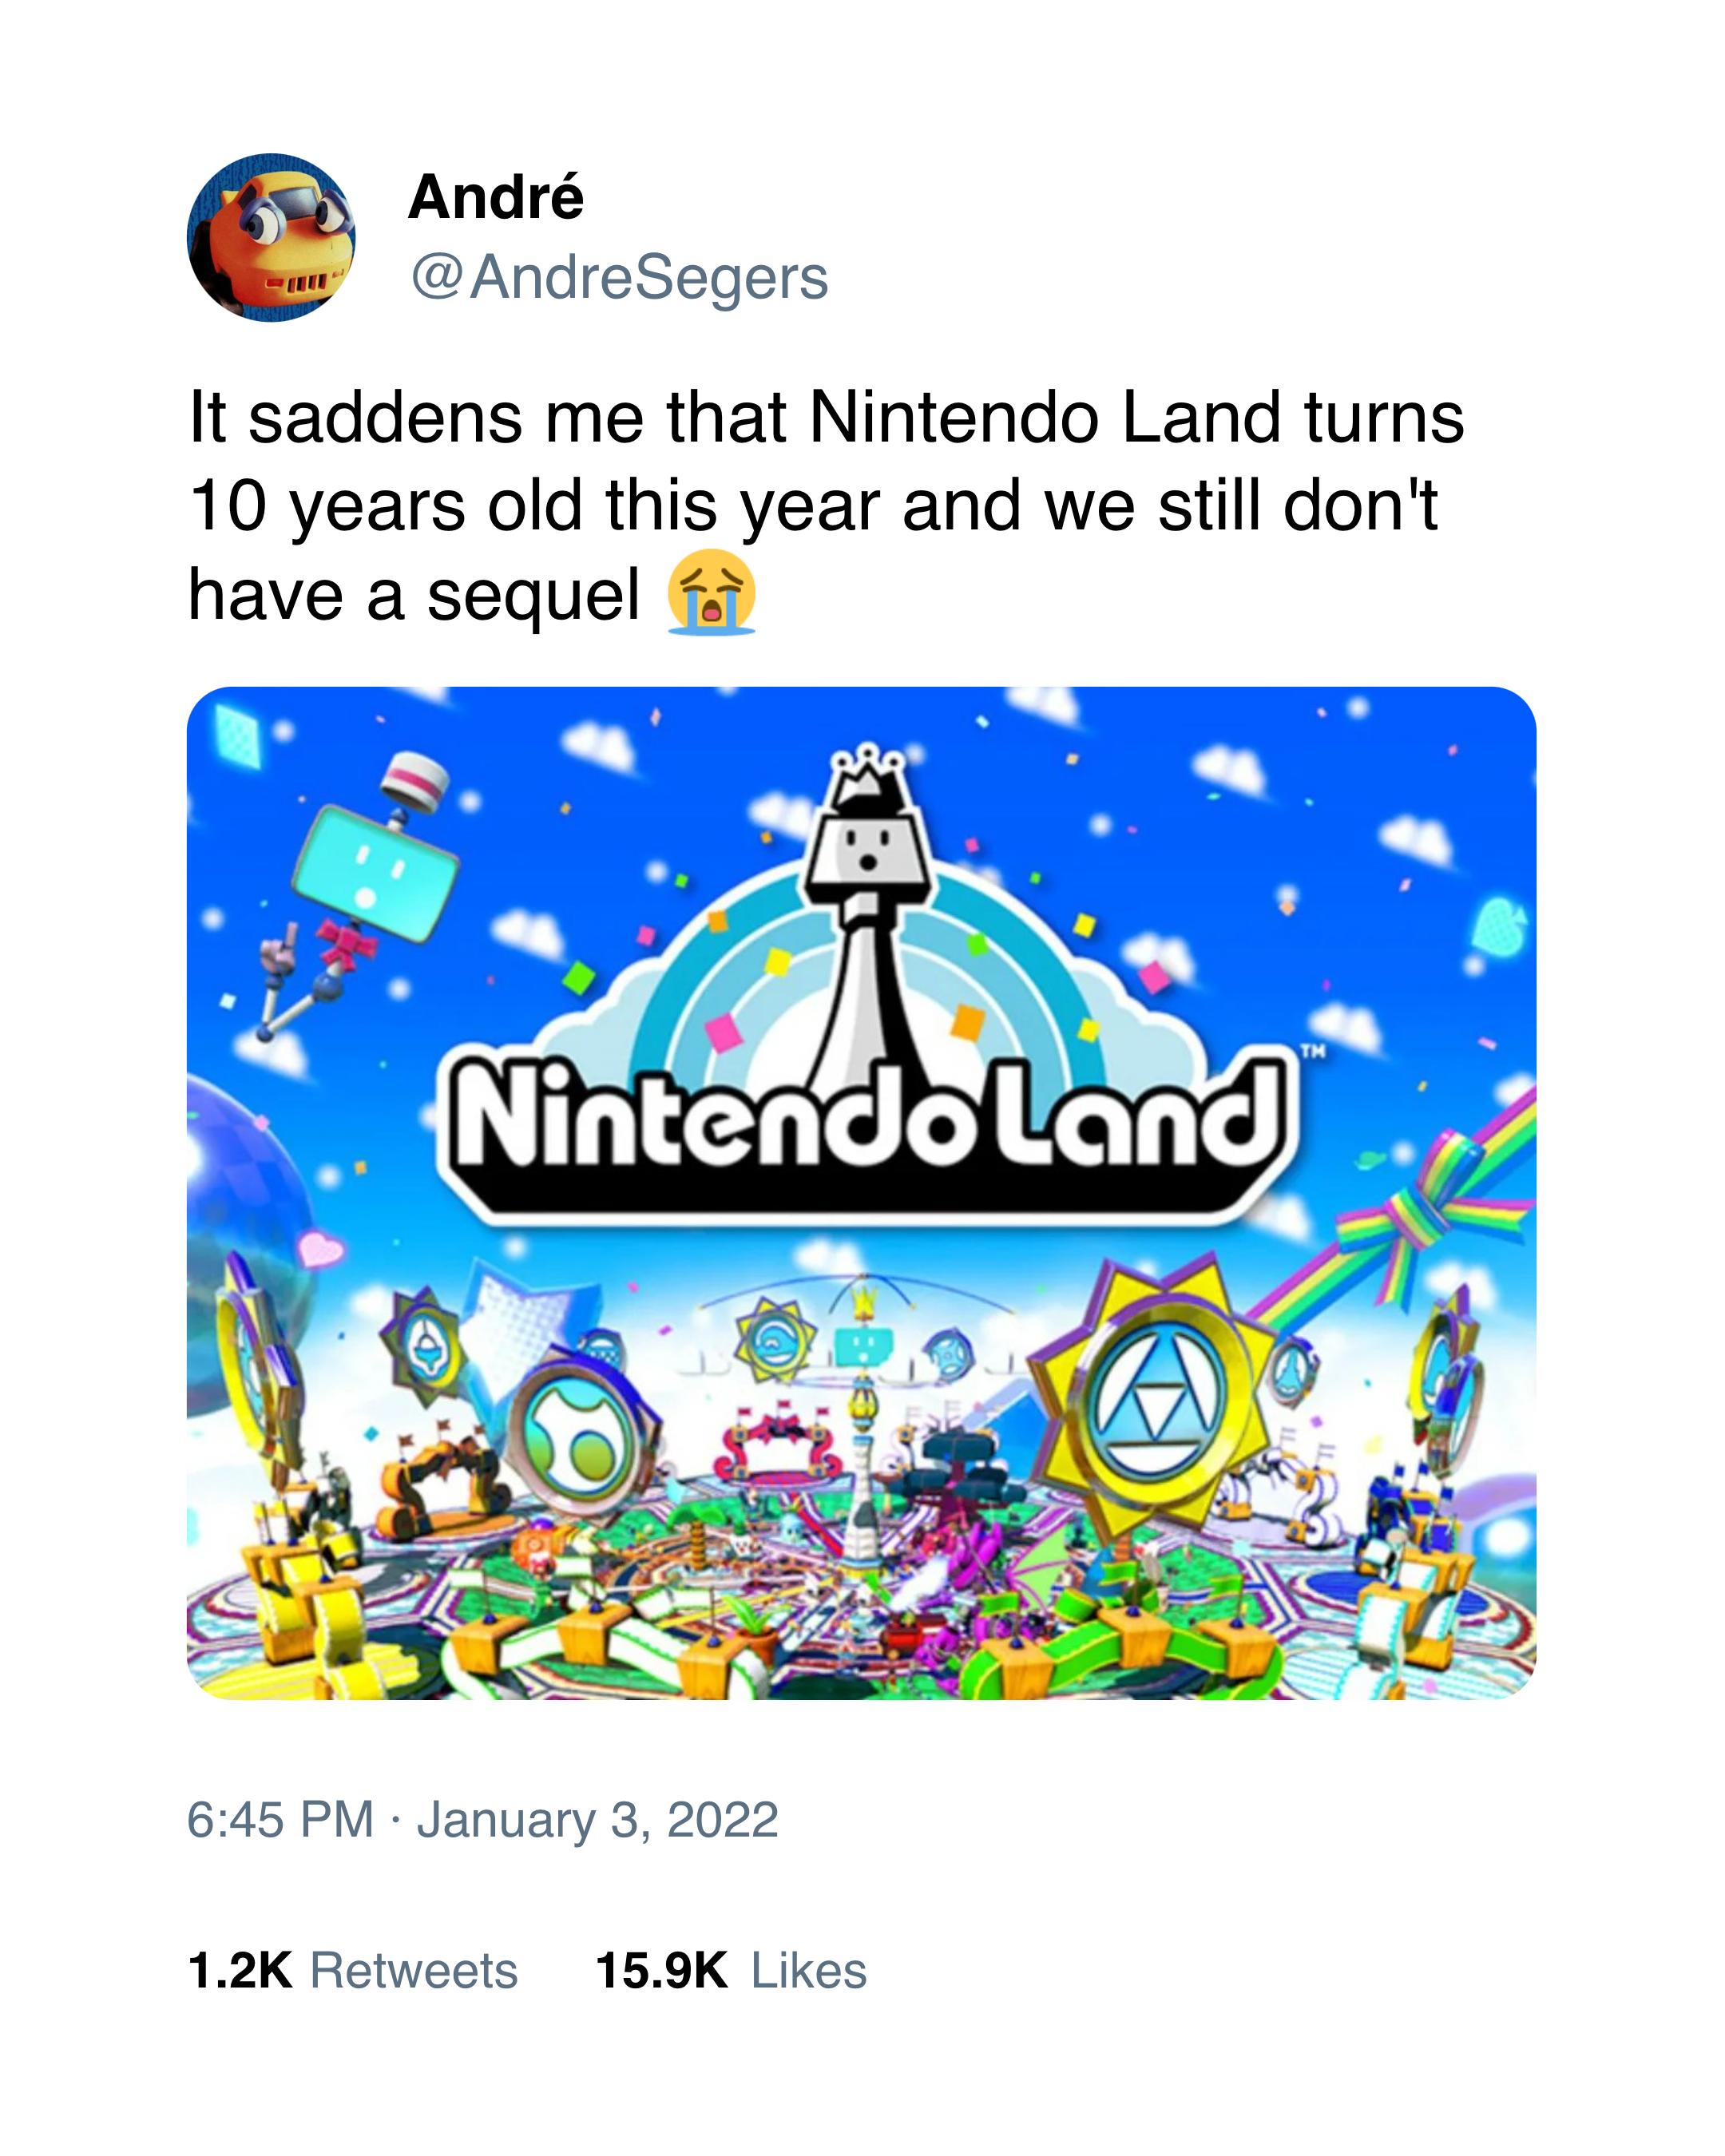 @AndreSegers: "It saddens me that Nintendo Land turns 10 years old this year and we still don't have a sequel"